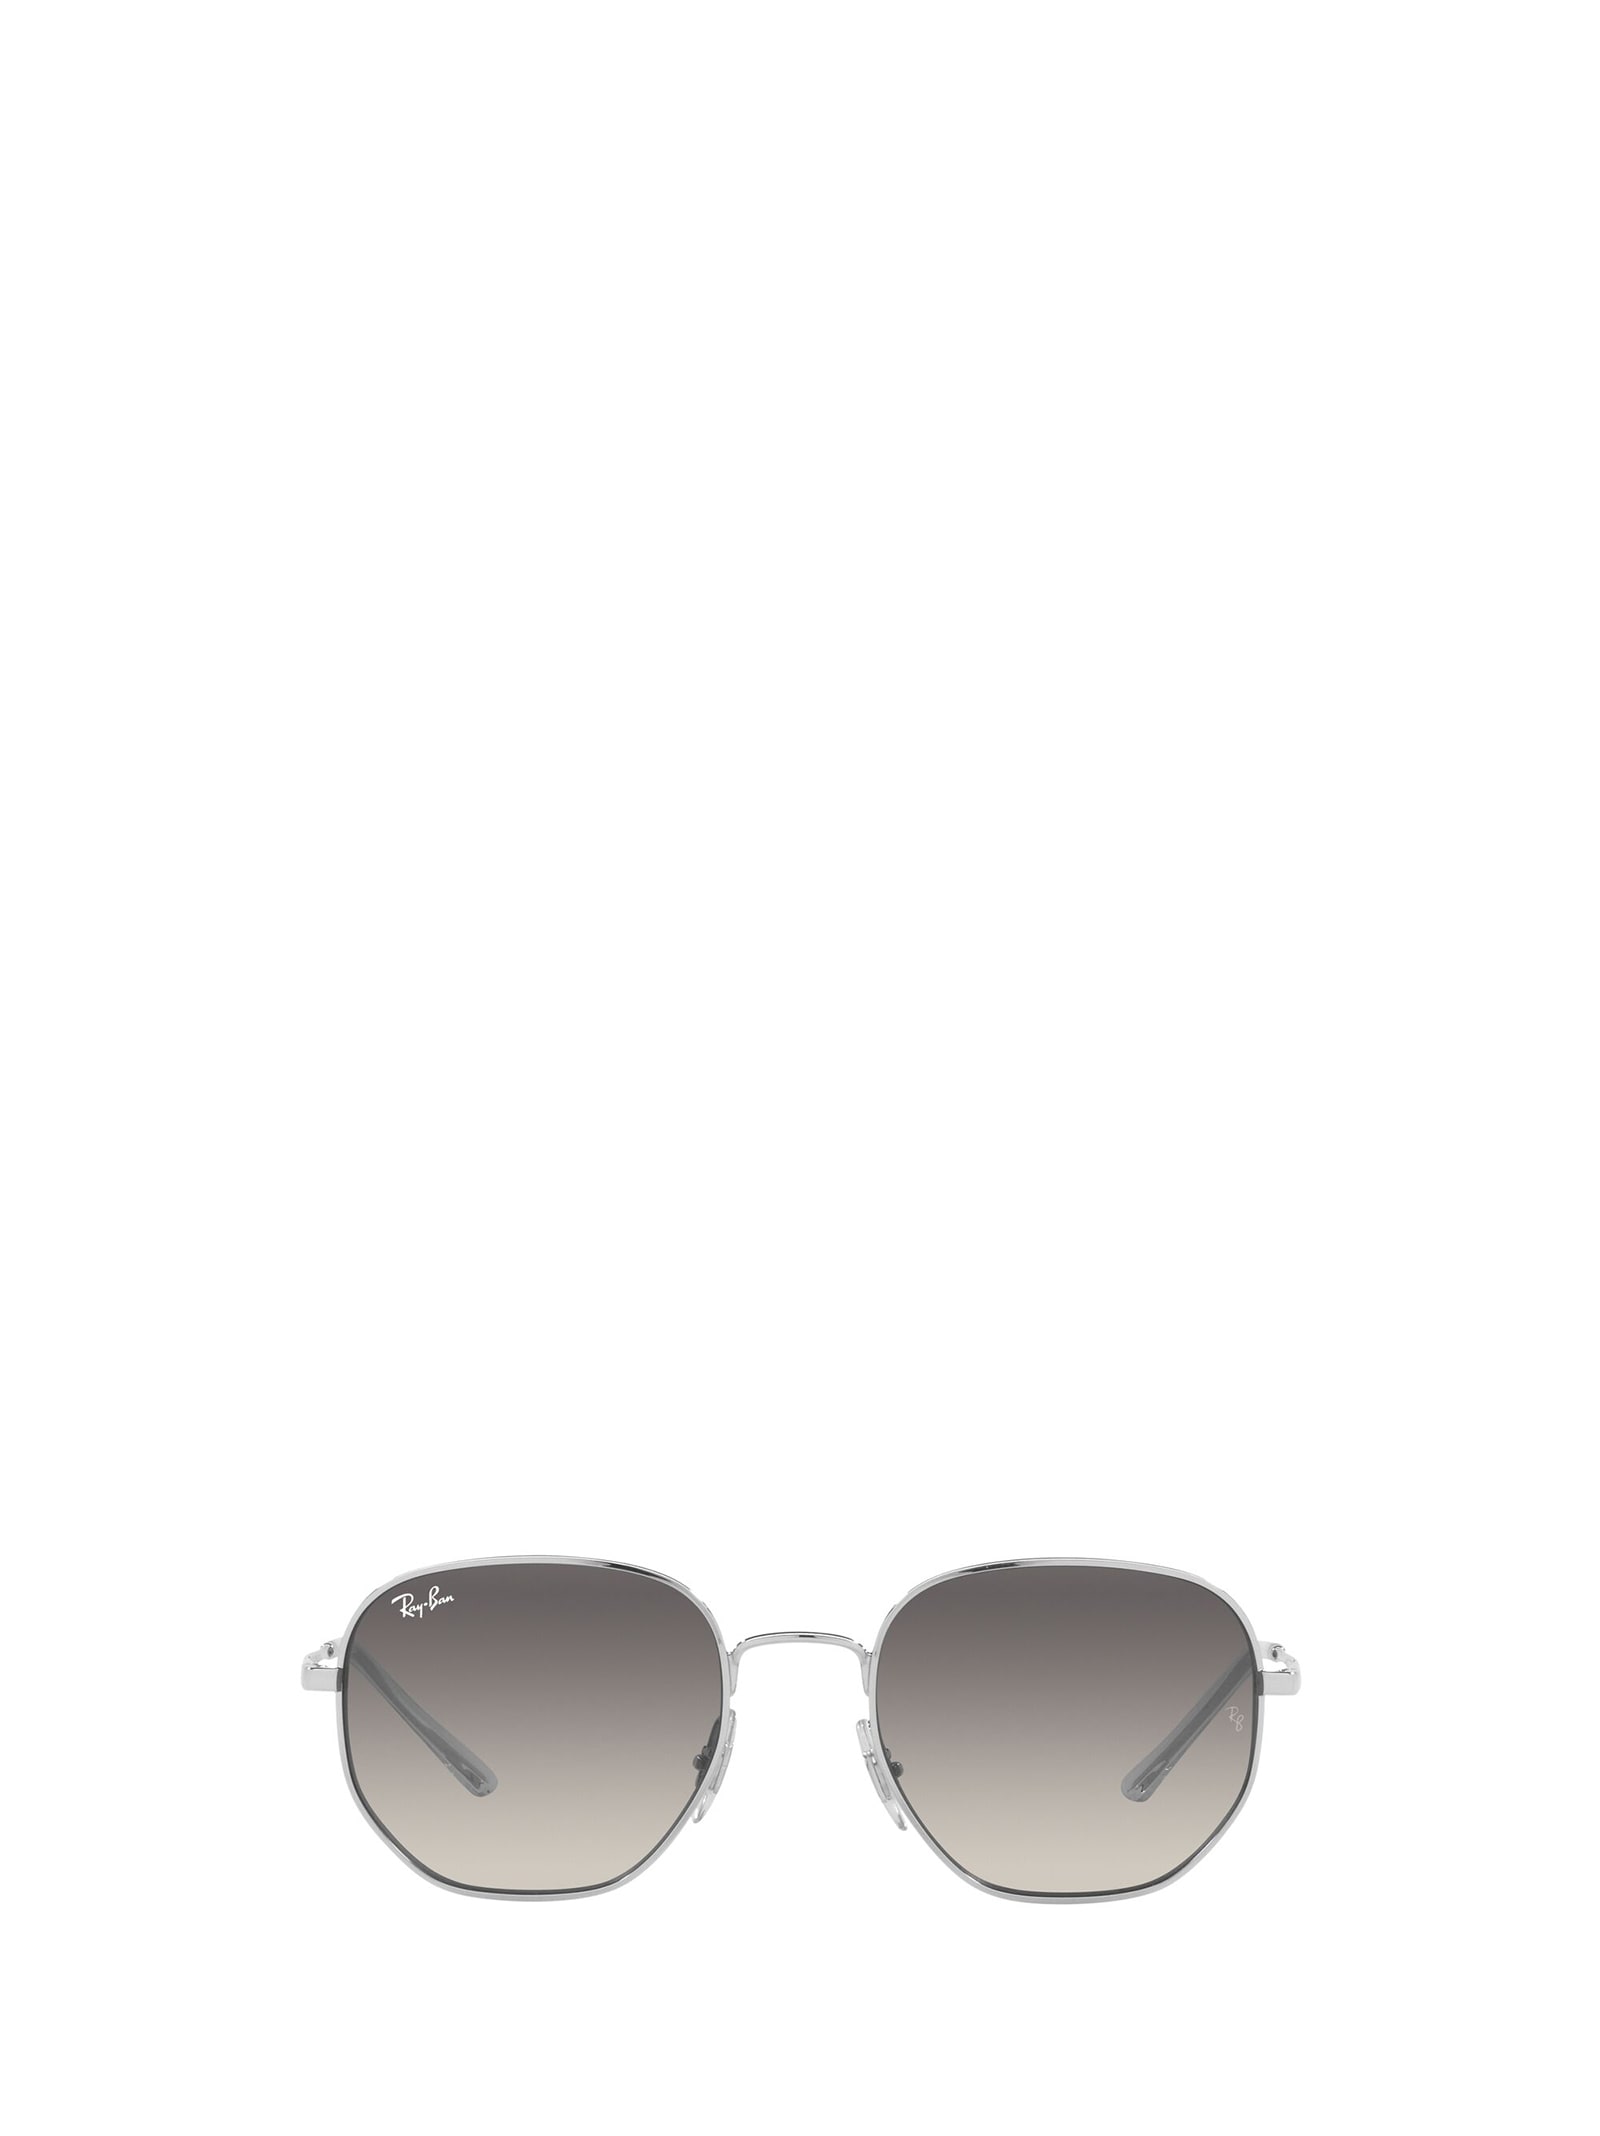 Ray-Ban Rb3682 Silver Sunglasses